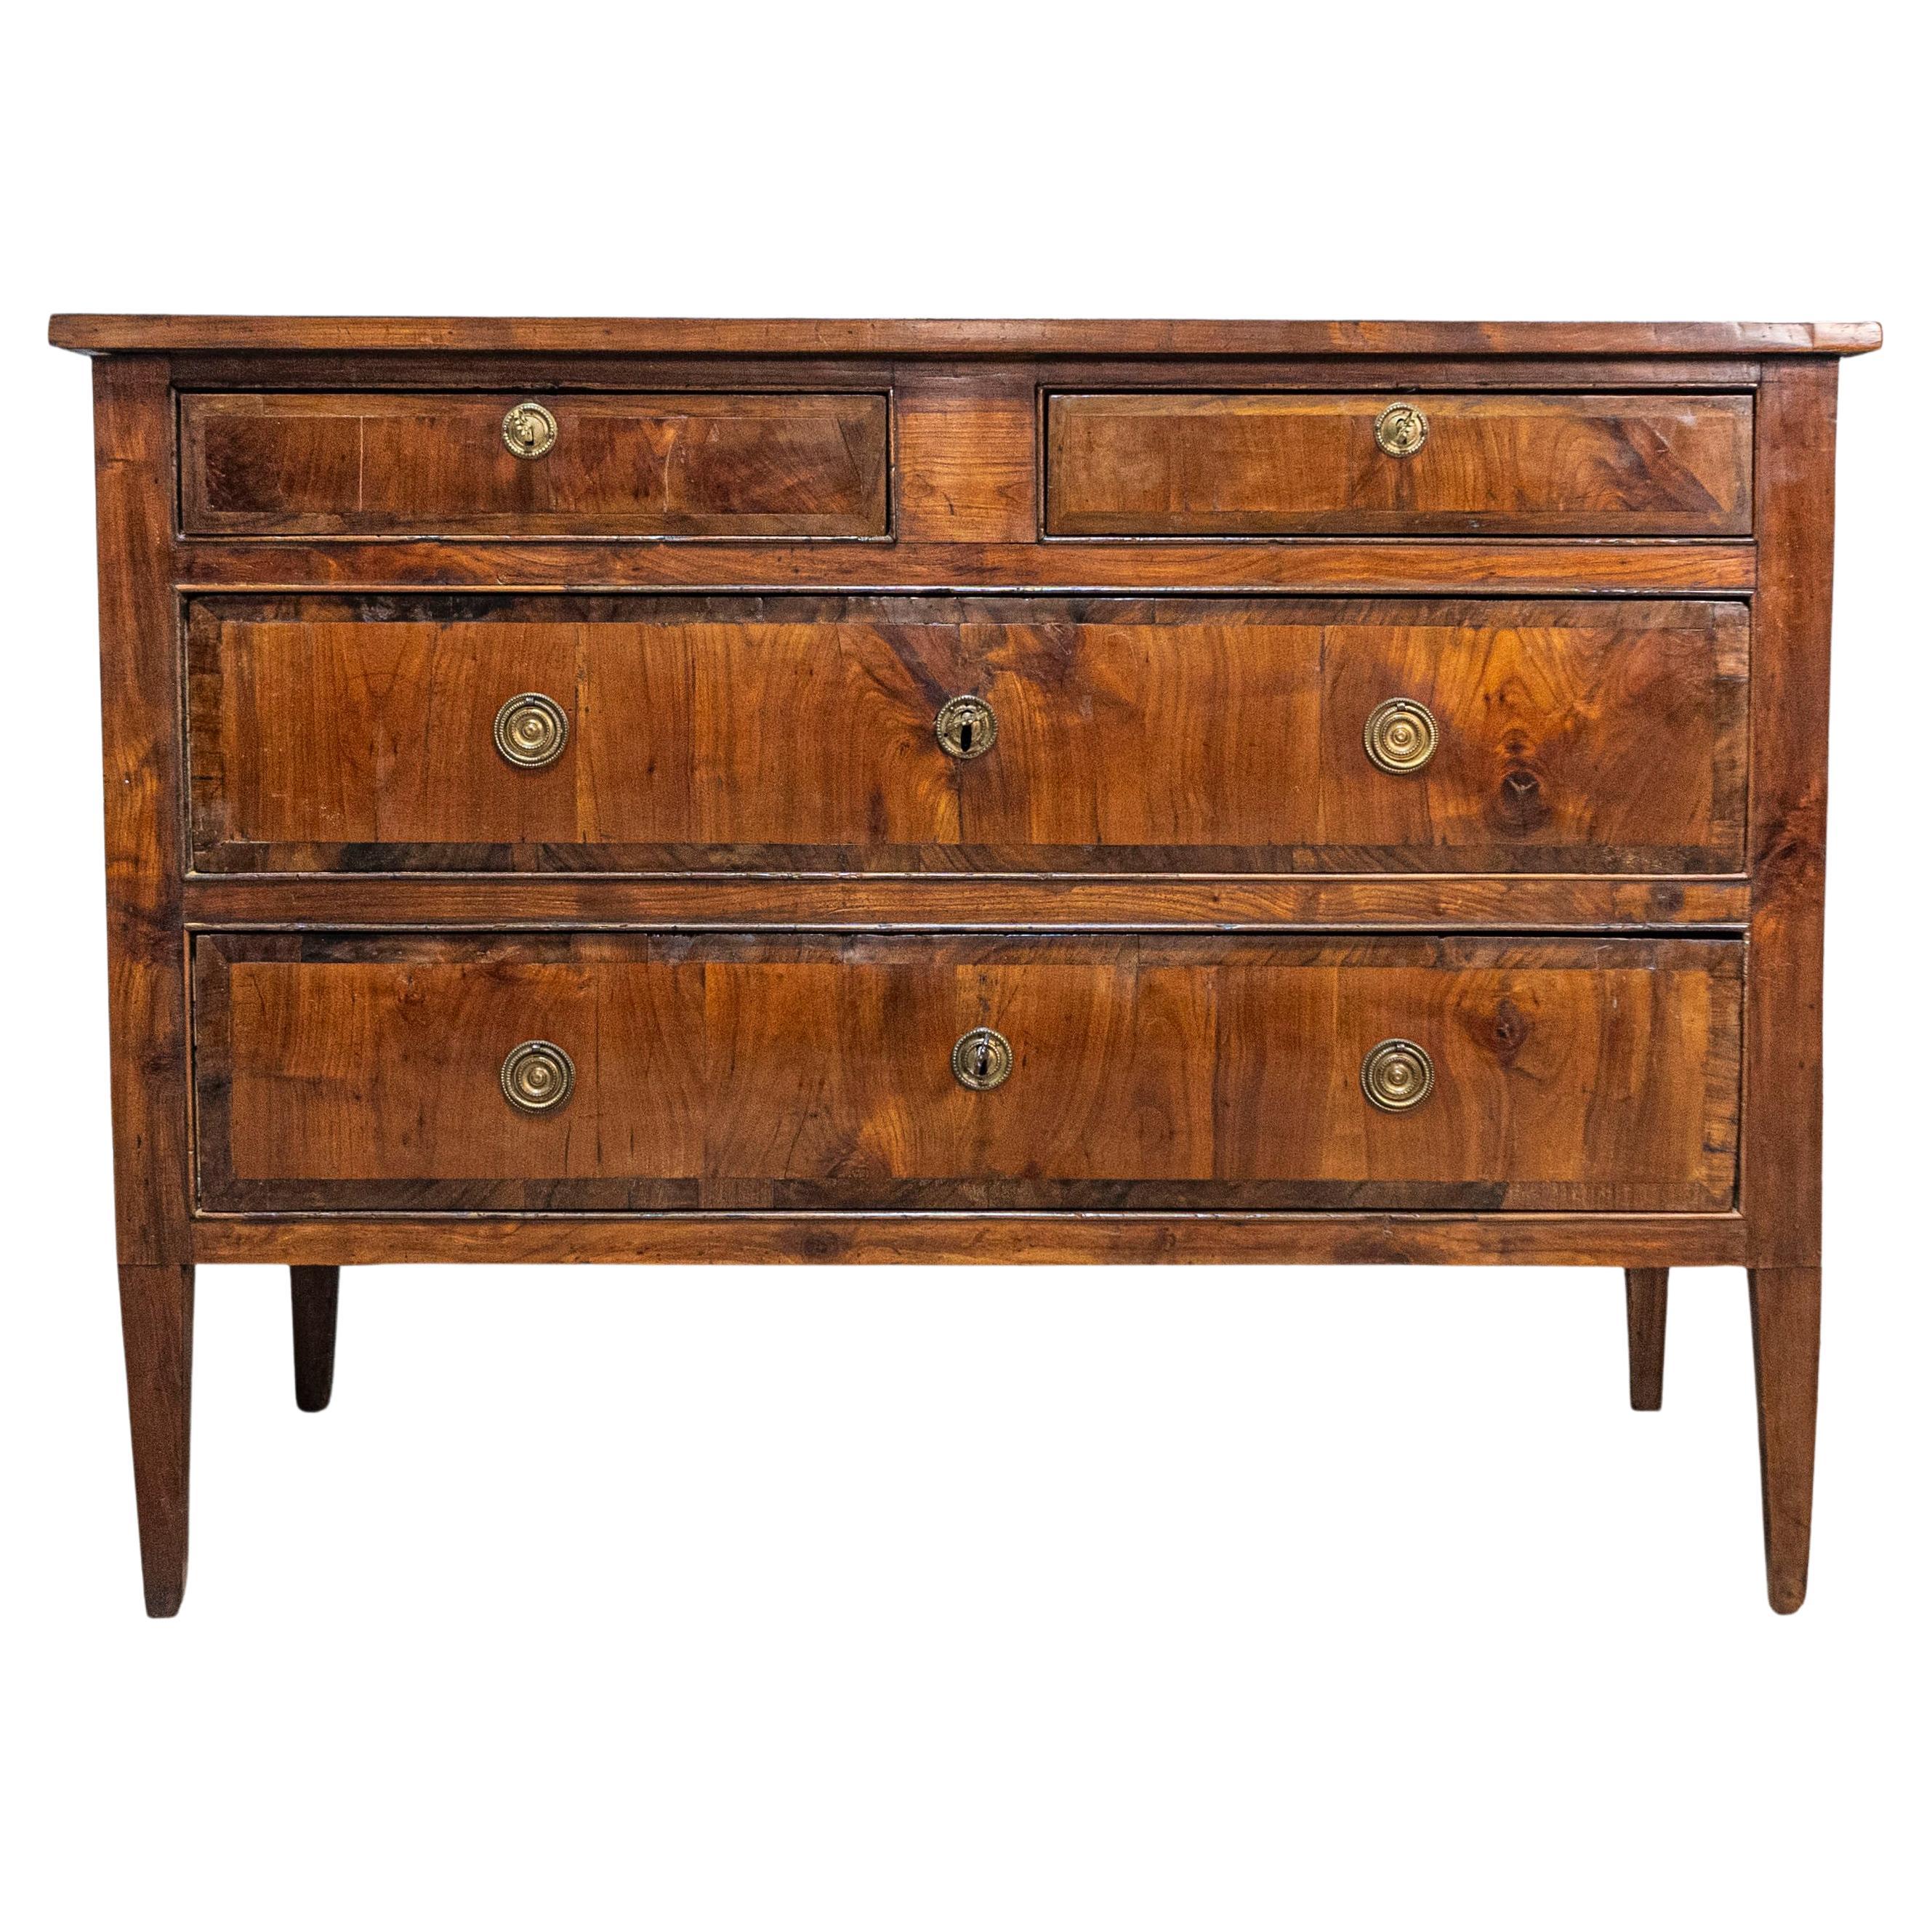 Italian Neoclassical Period 18th Century Walnut Commode with Four Drawers For Sale